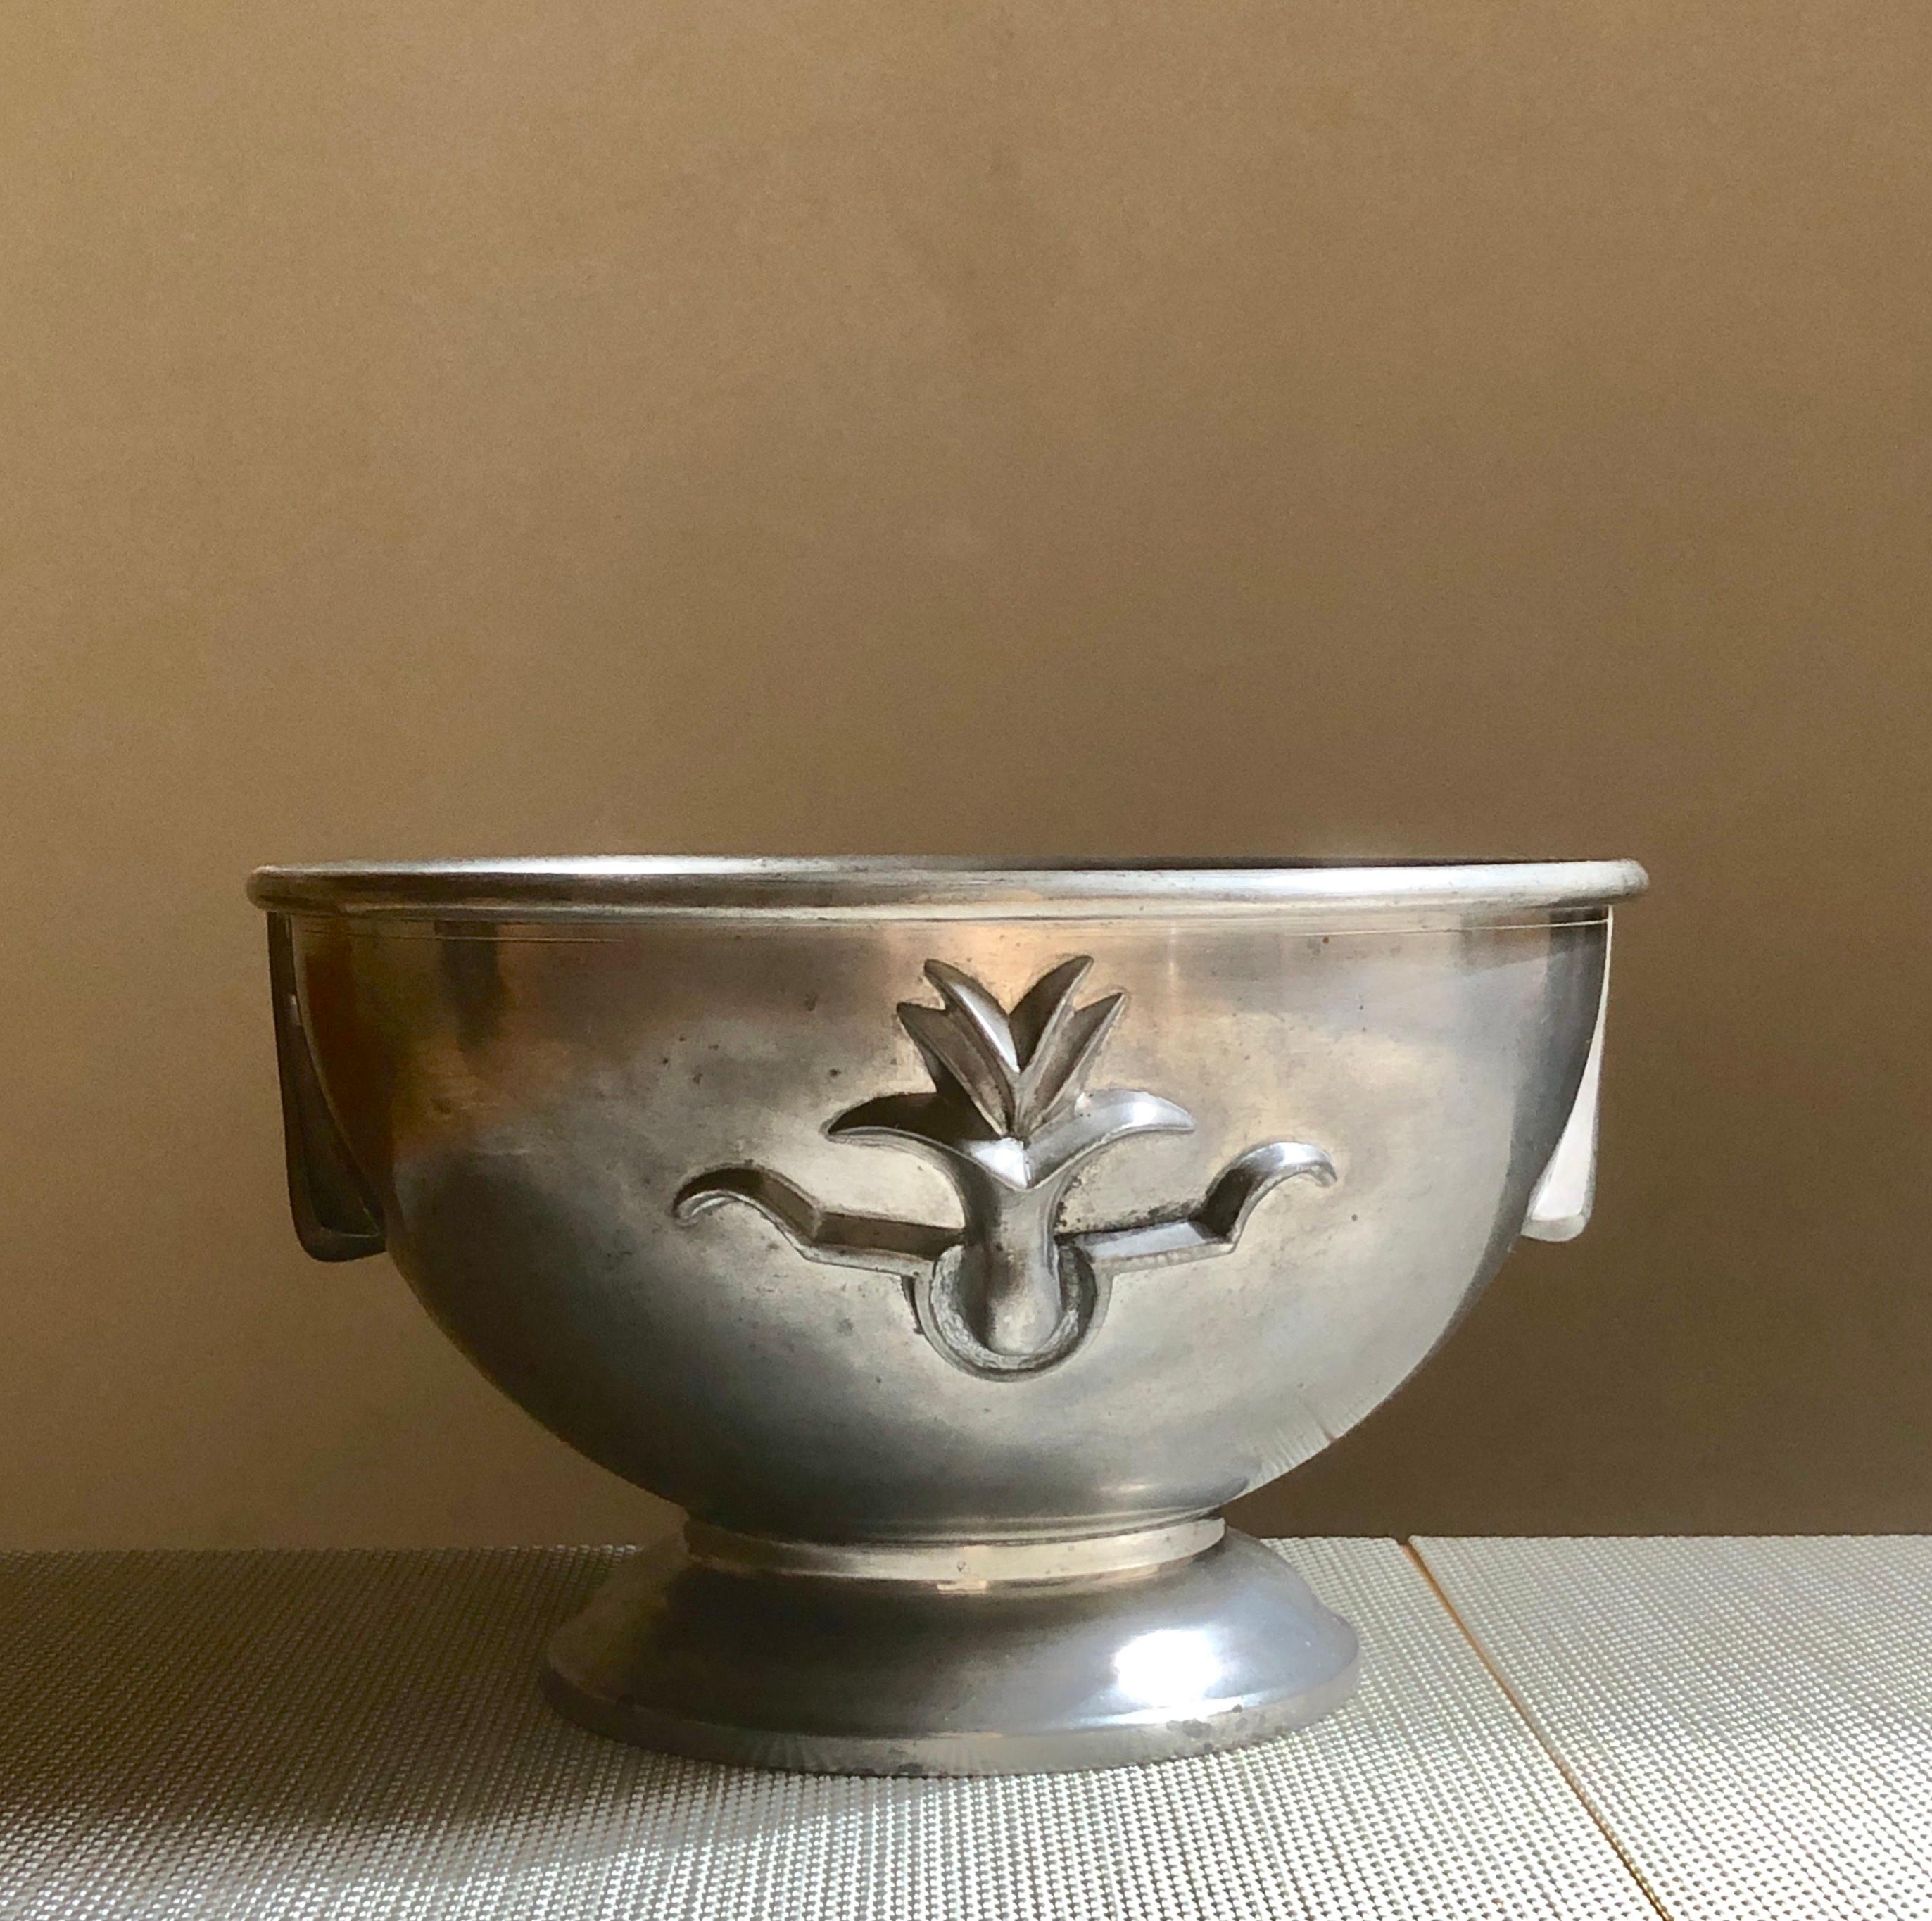 Swedish Grace style pewter bawl by Thorild Knutsson, Granna 1931.
Marked by manufacturer.